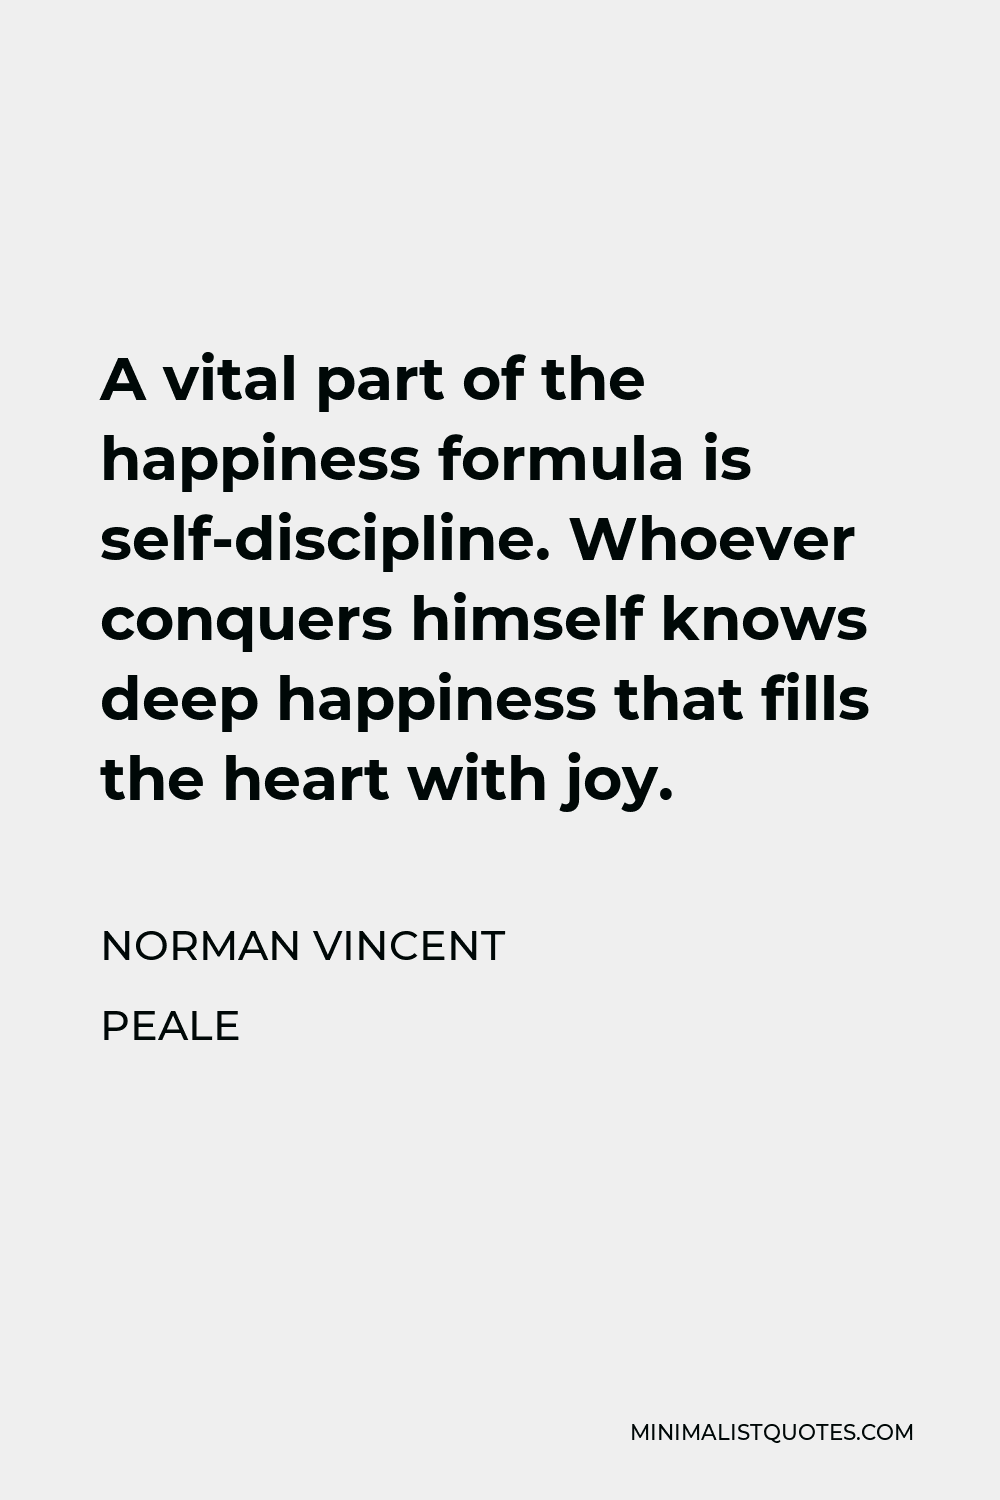 Norman Vincent Peale Quote - A vital part of the happiness formula is self-discipline. Whoever conquers himself knows deep happiness that fills the heart with joy.